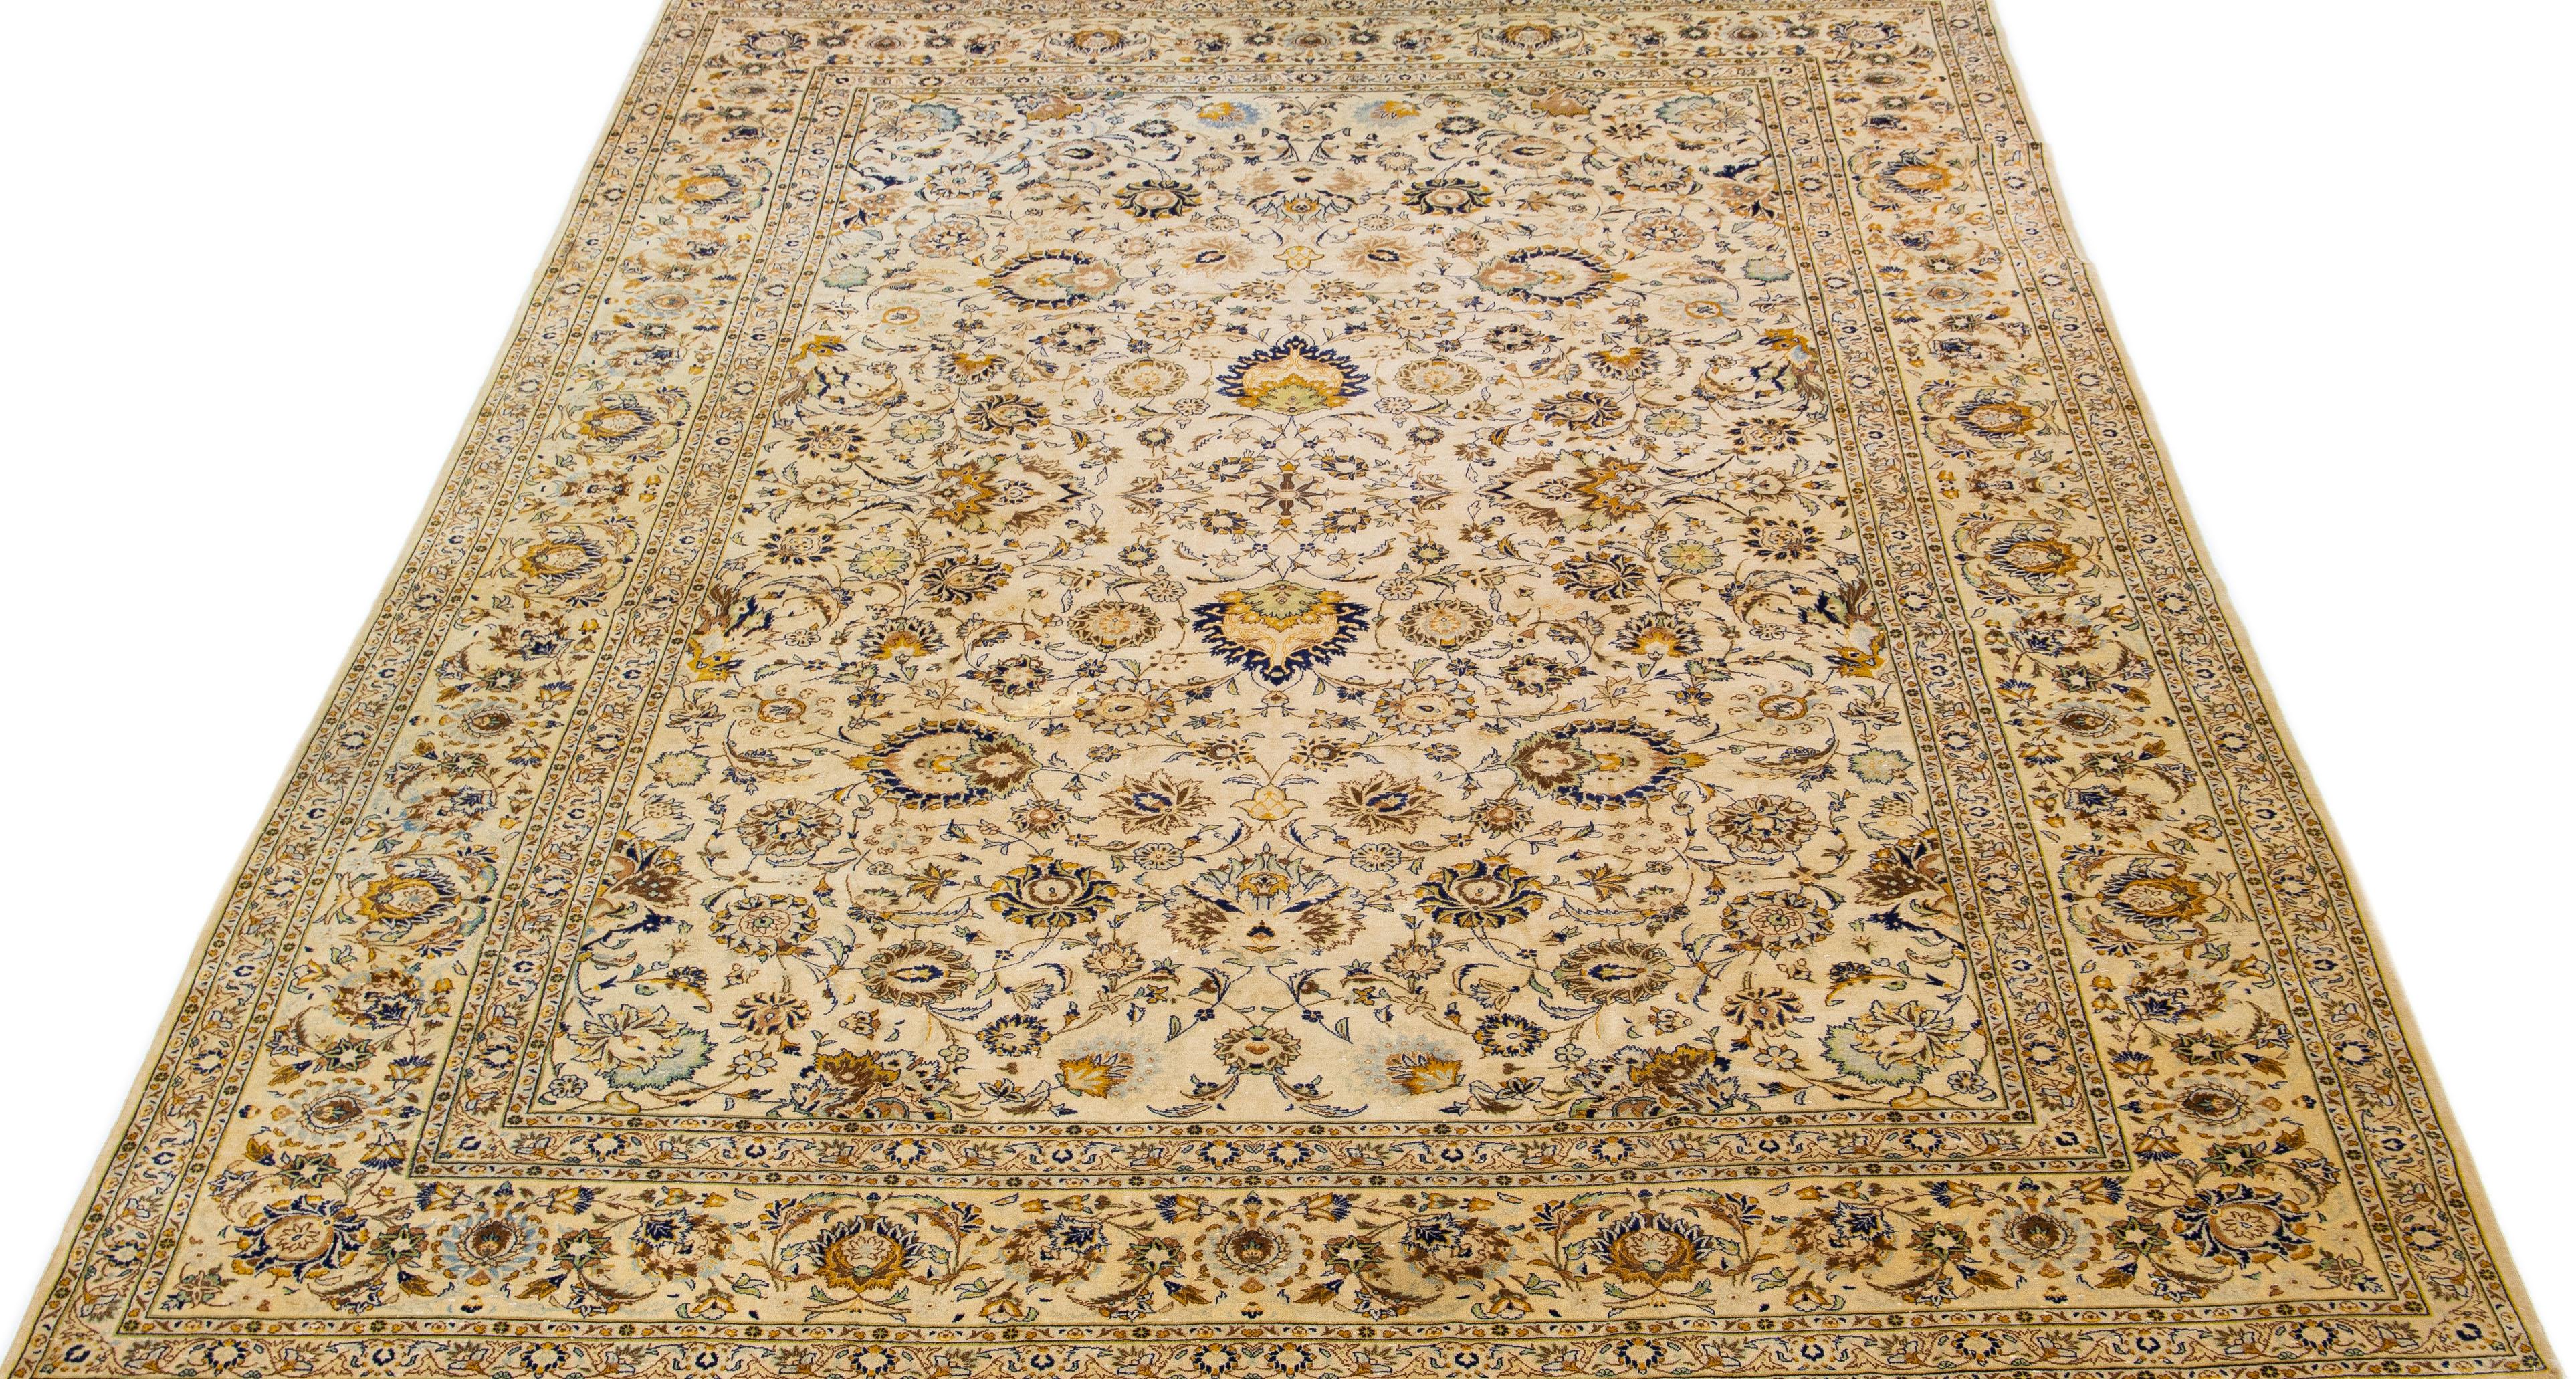 Beautiful antique Kashan hand knotted wool rug with a beige color field. This Persian rug has blue, yellow, and brown accents in a gorgeous Classic floral design. 

This rug measures 10'4